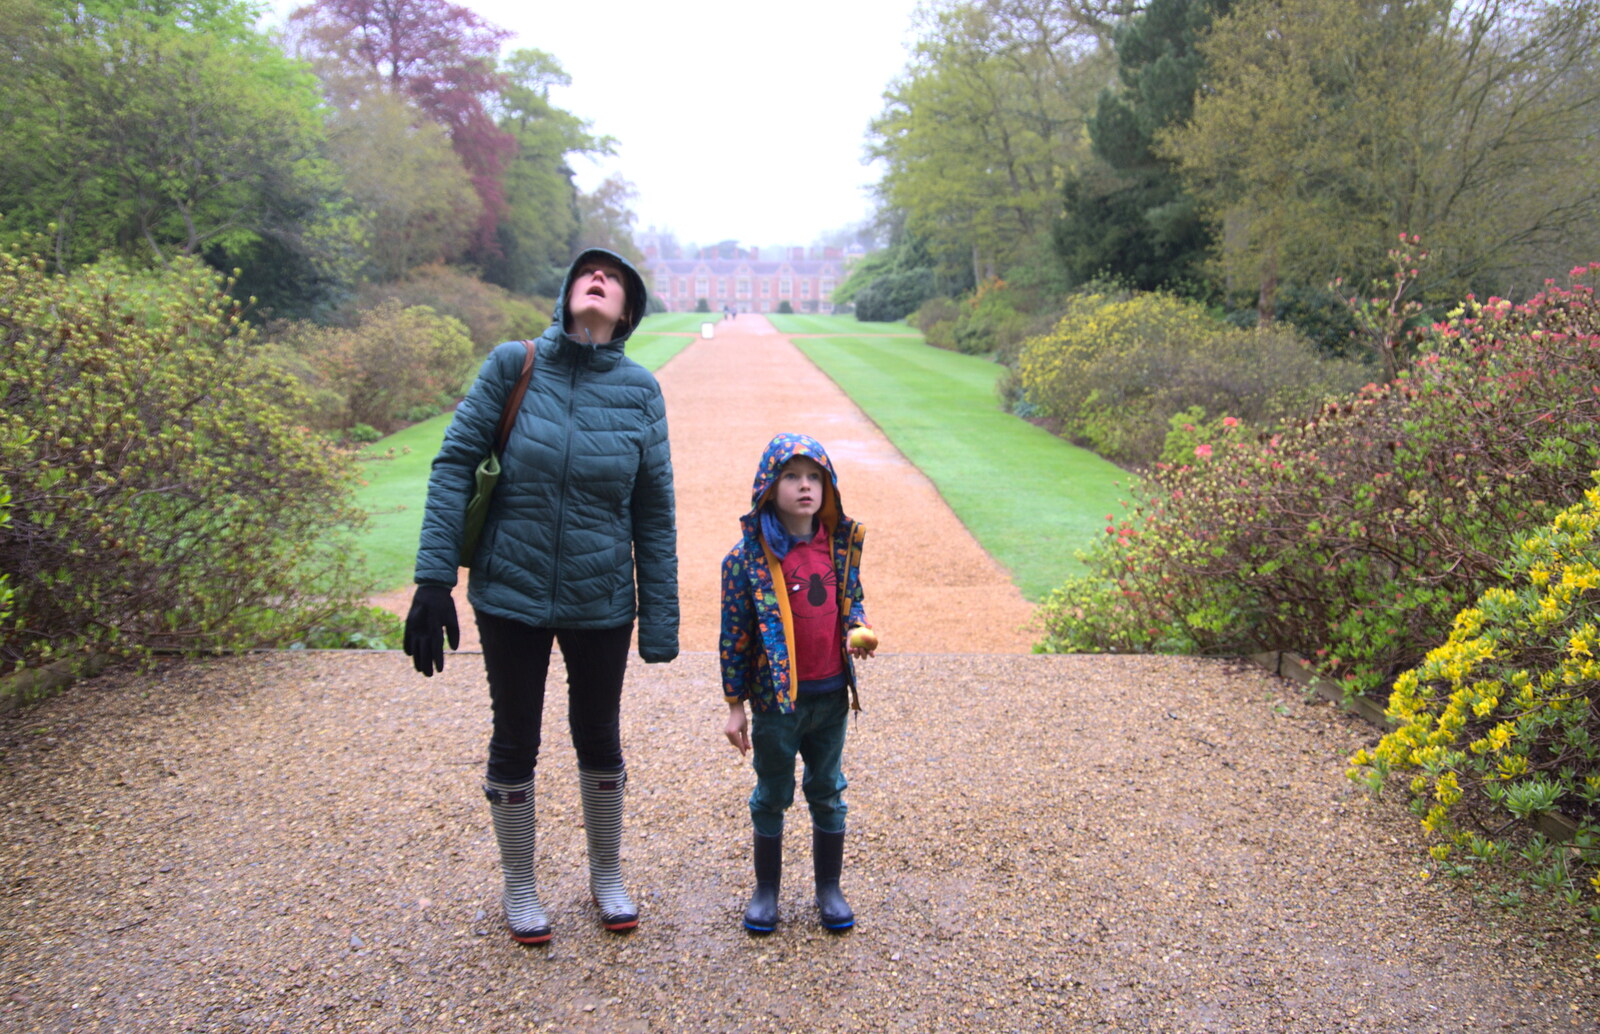 Isobel and Harry look up from A Trip to Blickling Hall, Aylsham, Norfolk - 29th April 2018